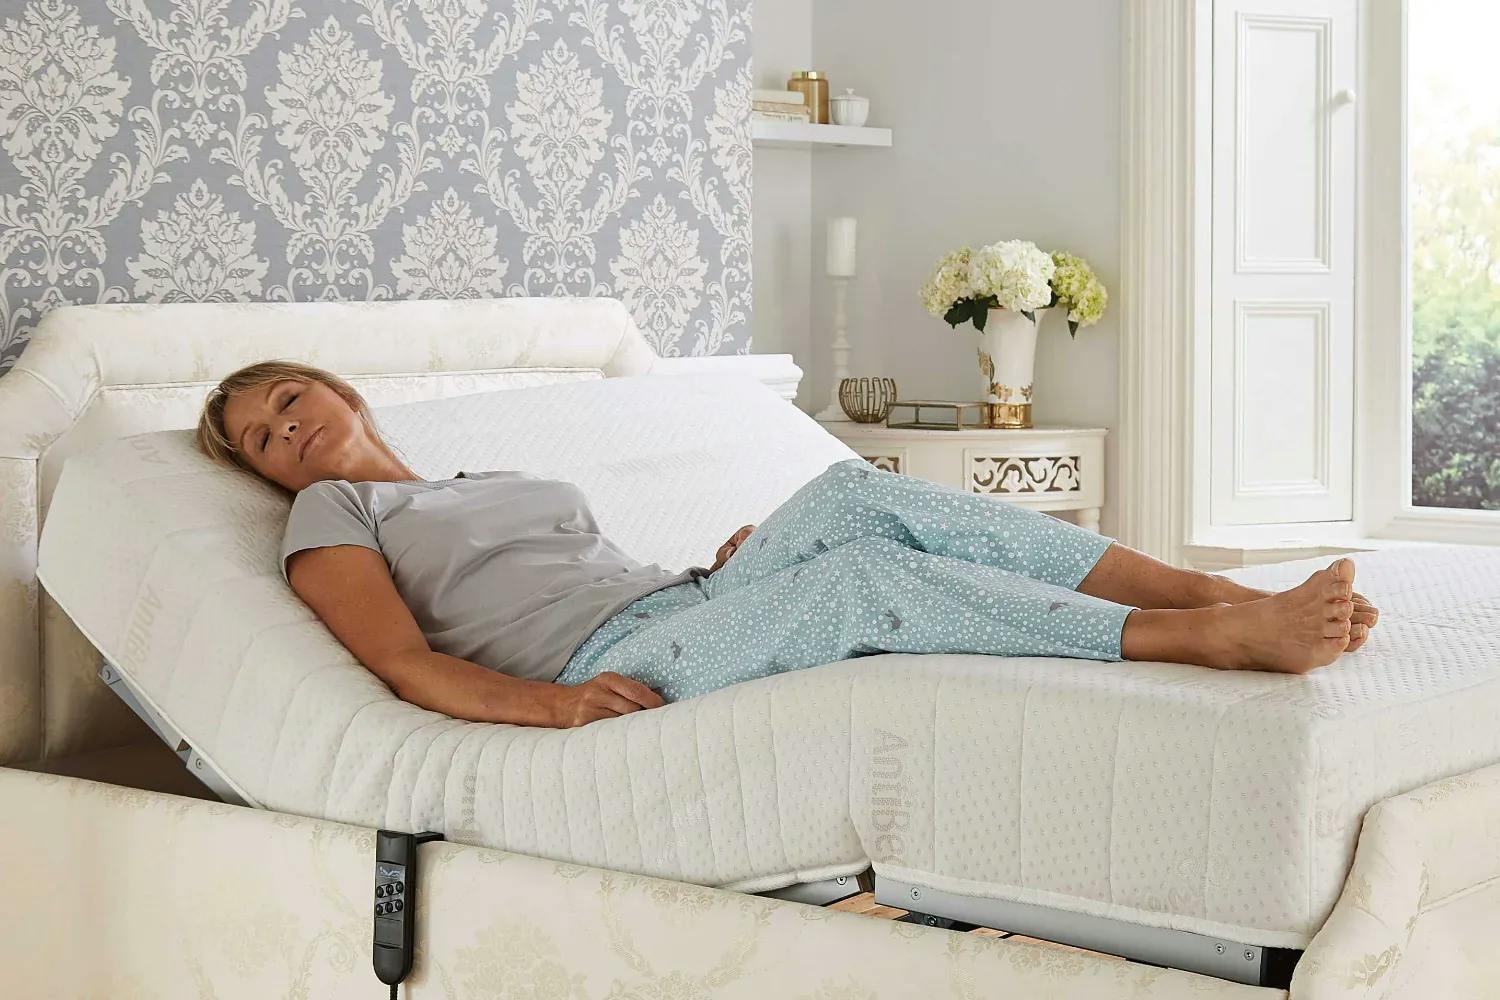 Woman lying on an adjustable bed